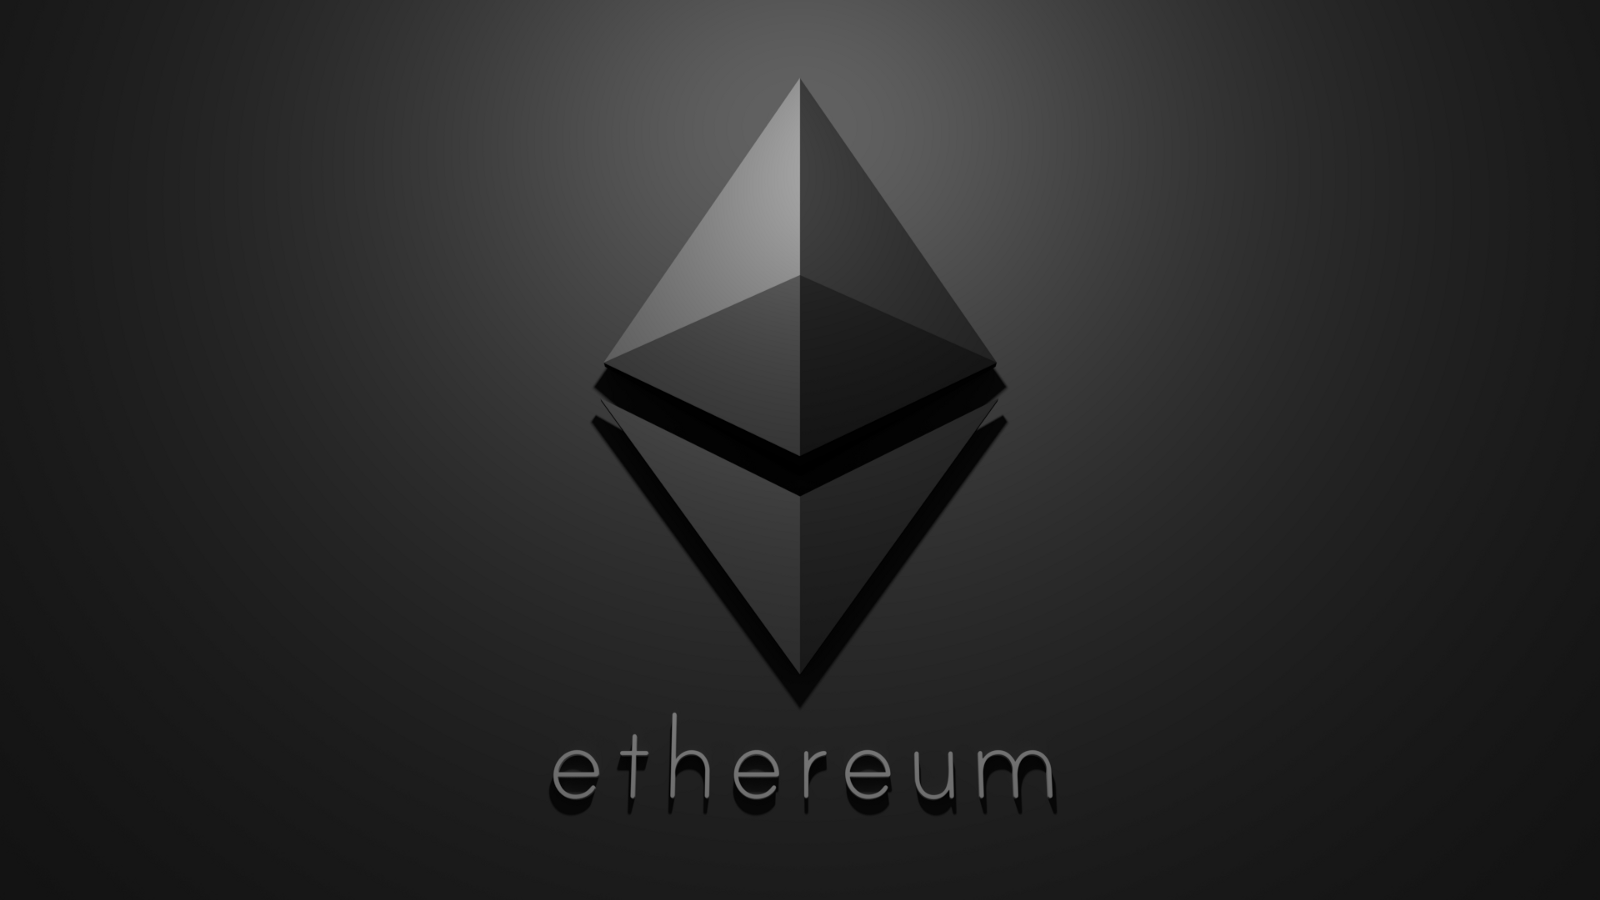 Vitalik Buterin speaks about Ethereum [ETH] 2.0 Proof Of Stake [POS] protocol